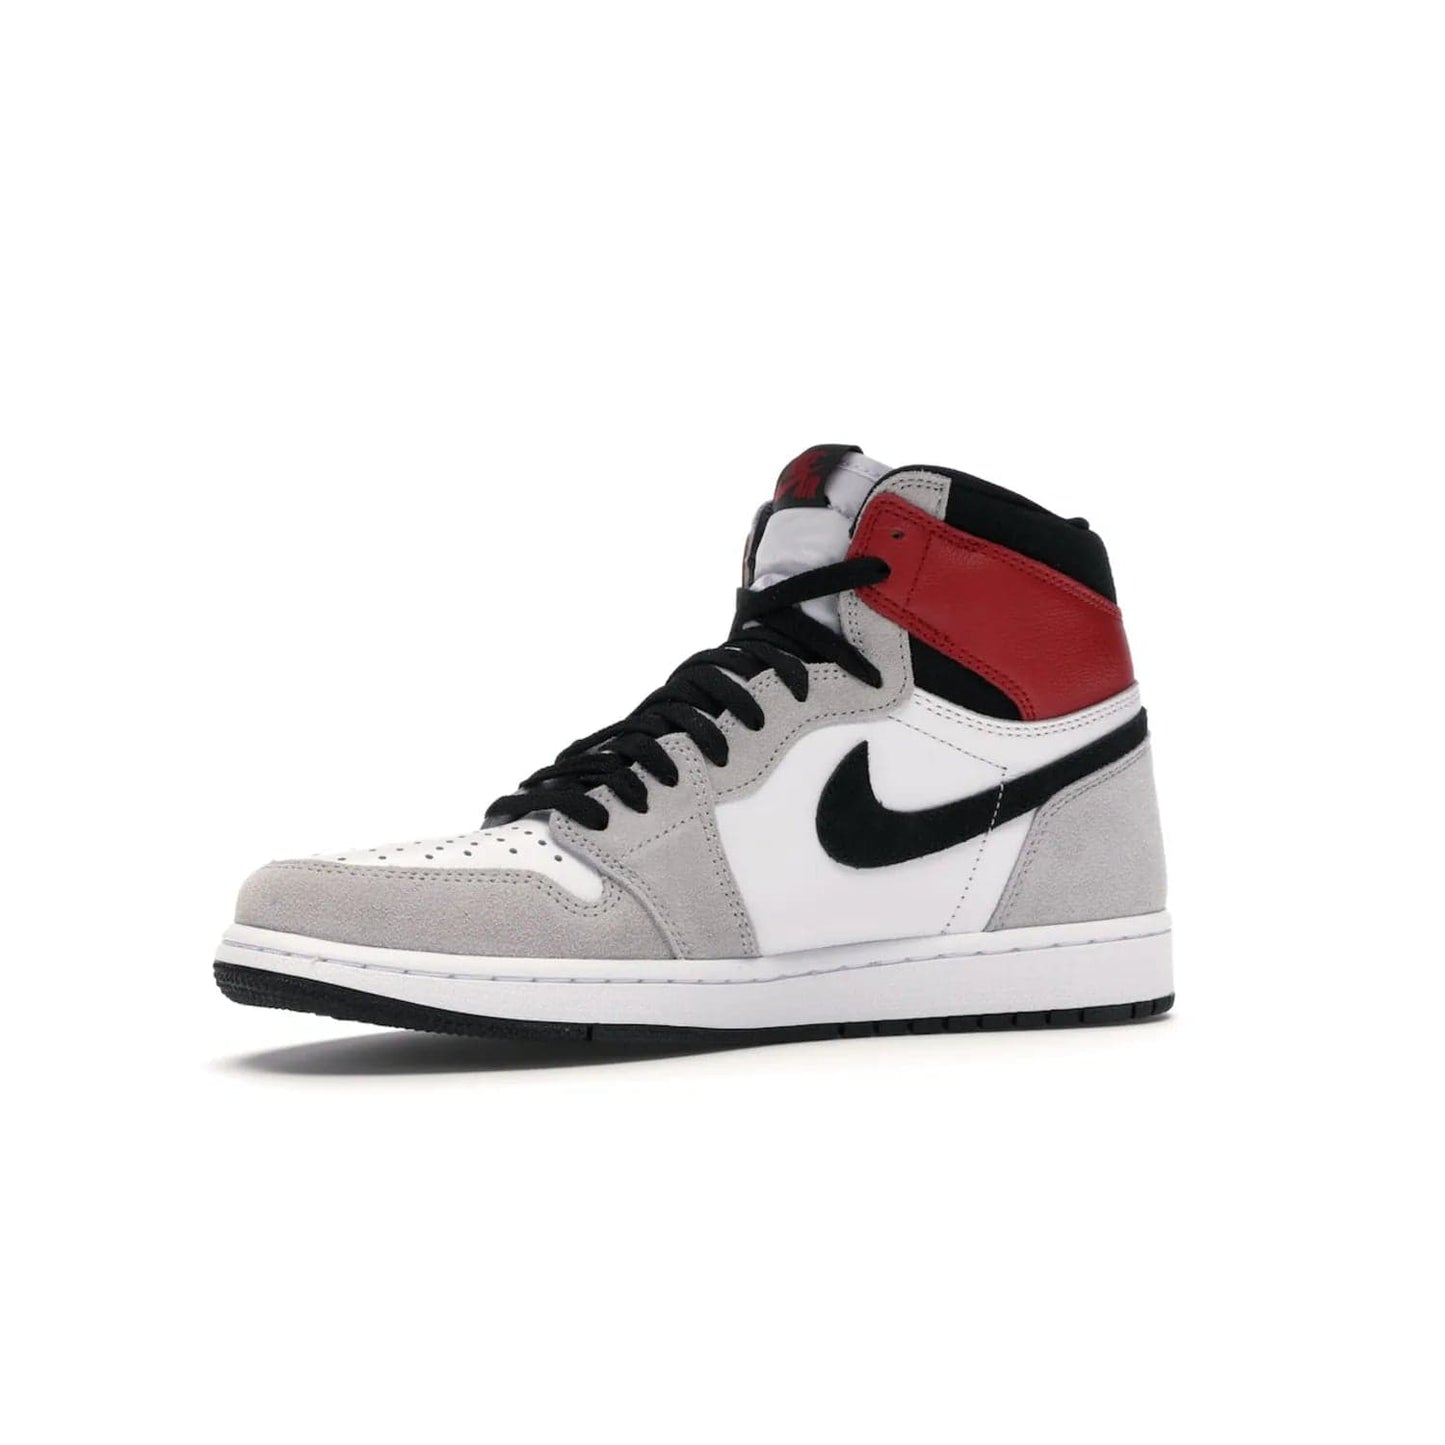 Jordan 1 Retro High Light Smoke Grey - Image 16 - Only at www.BallersClubKickz.com - Comfortable and stylish, Jordan 1 Retro High Light Smoke Grey offers a unique spin on a classic design. White leather, grey suede, red leather and black details are set on a white midsole and black outsole. Get the sneaker released in July 2020 and add a twist to your wardrobe.